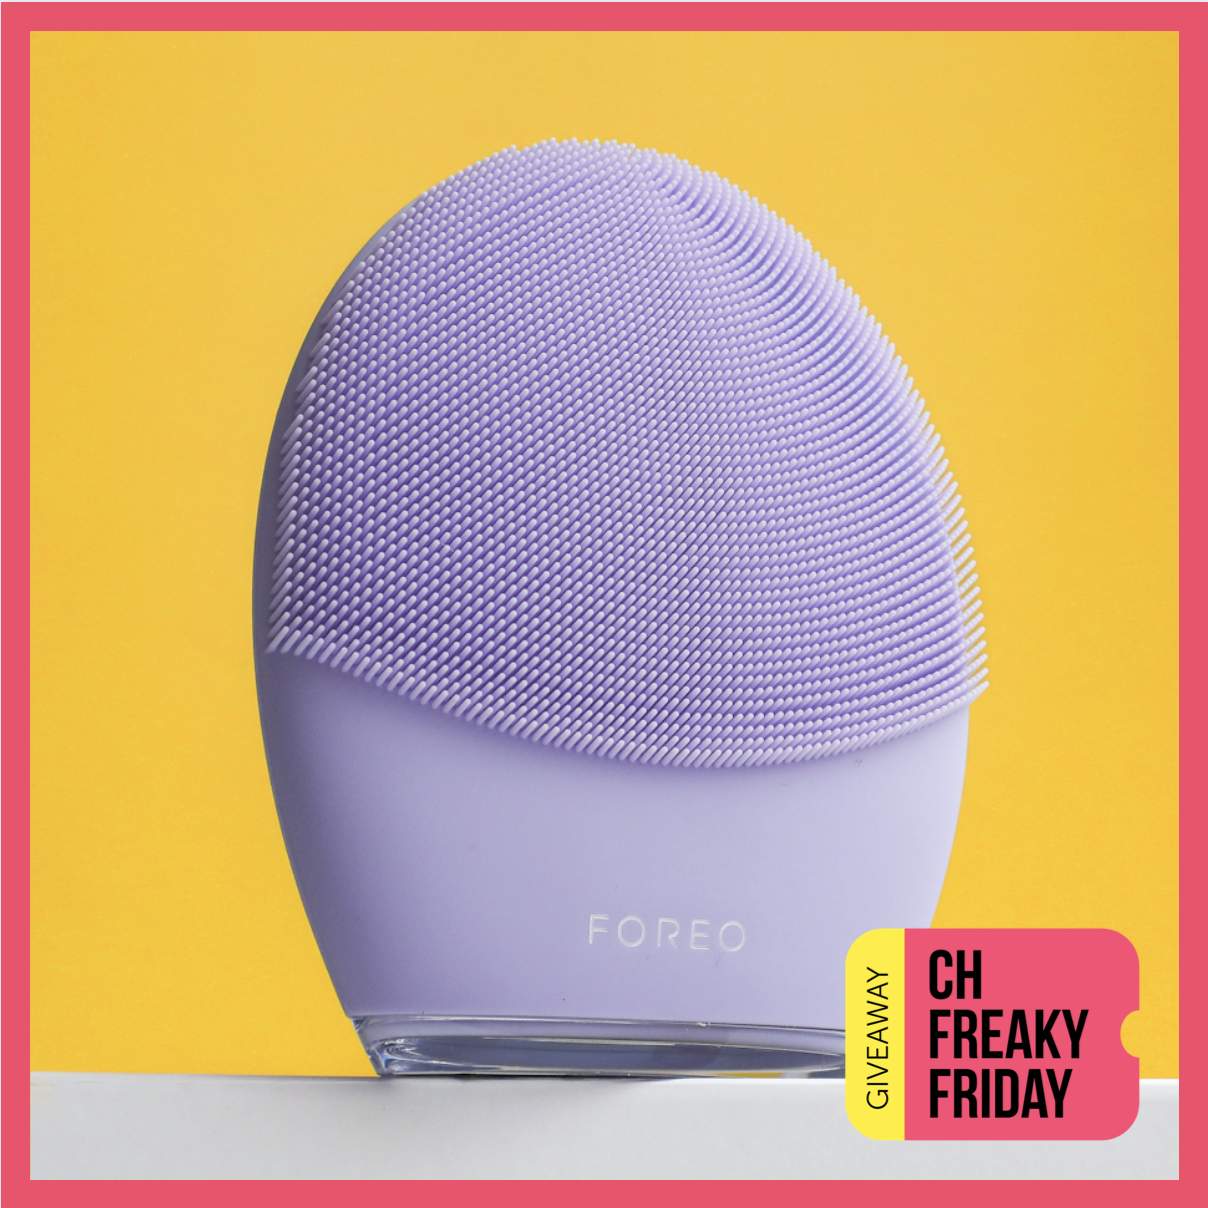 Freaky Friday Giveaway - Foreo